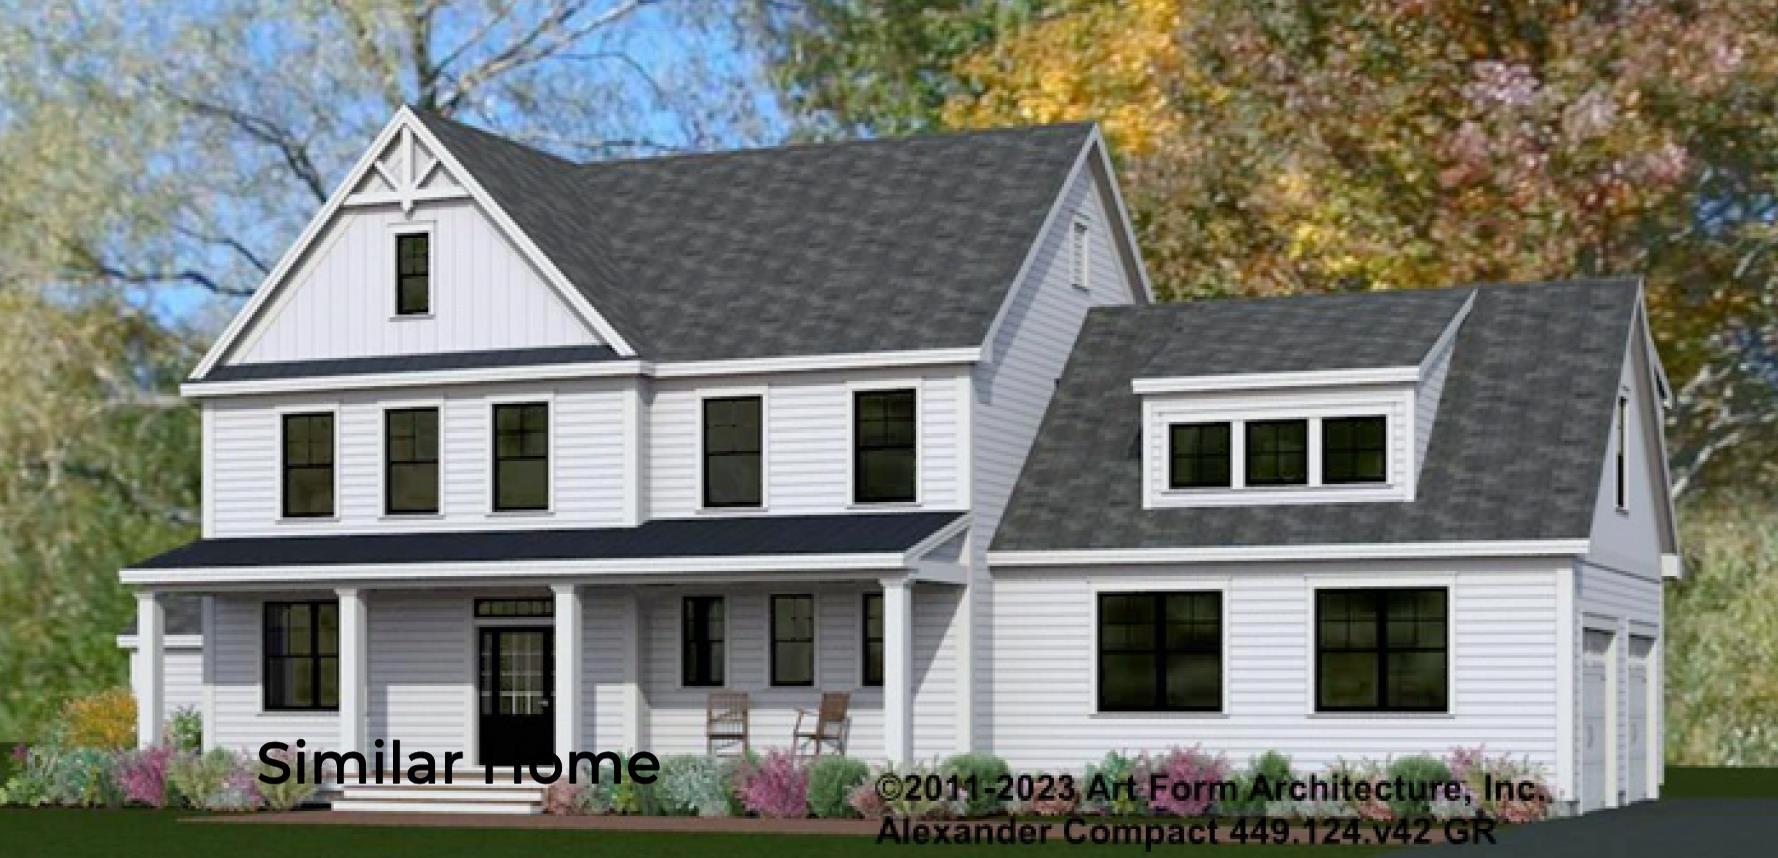 Property Image for Lot I Longview Place